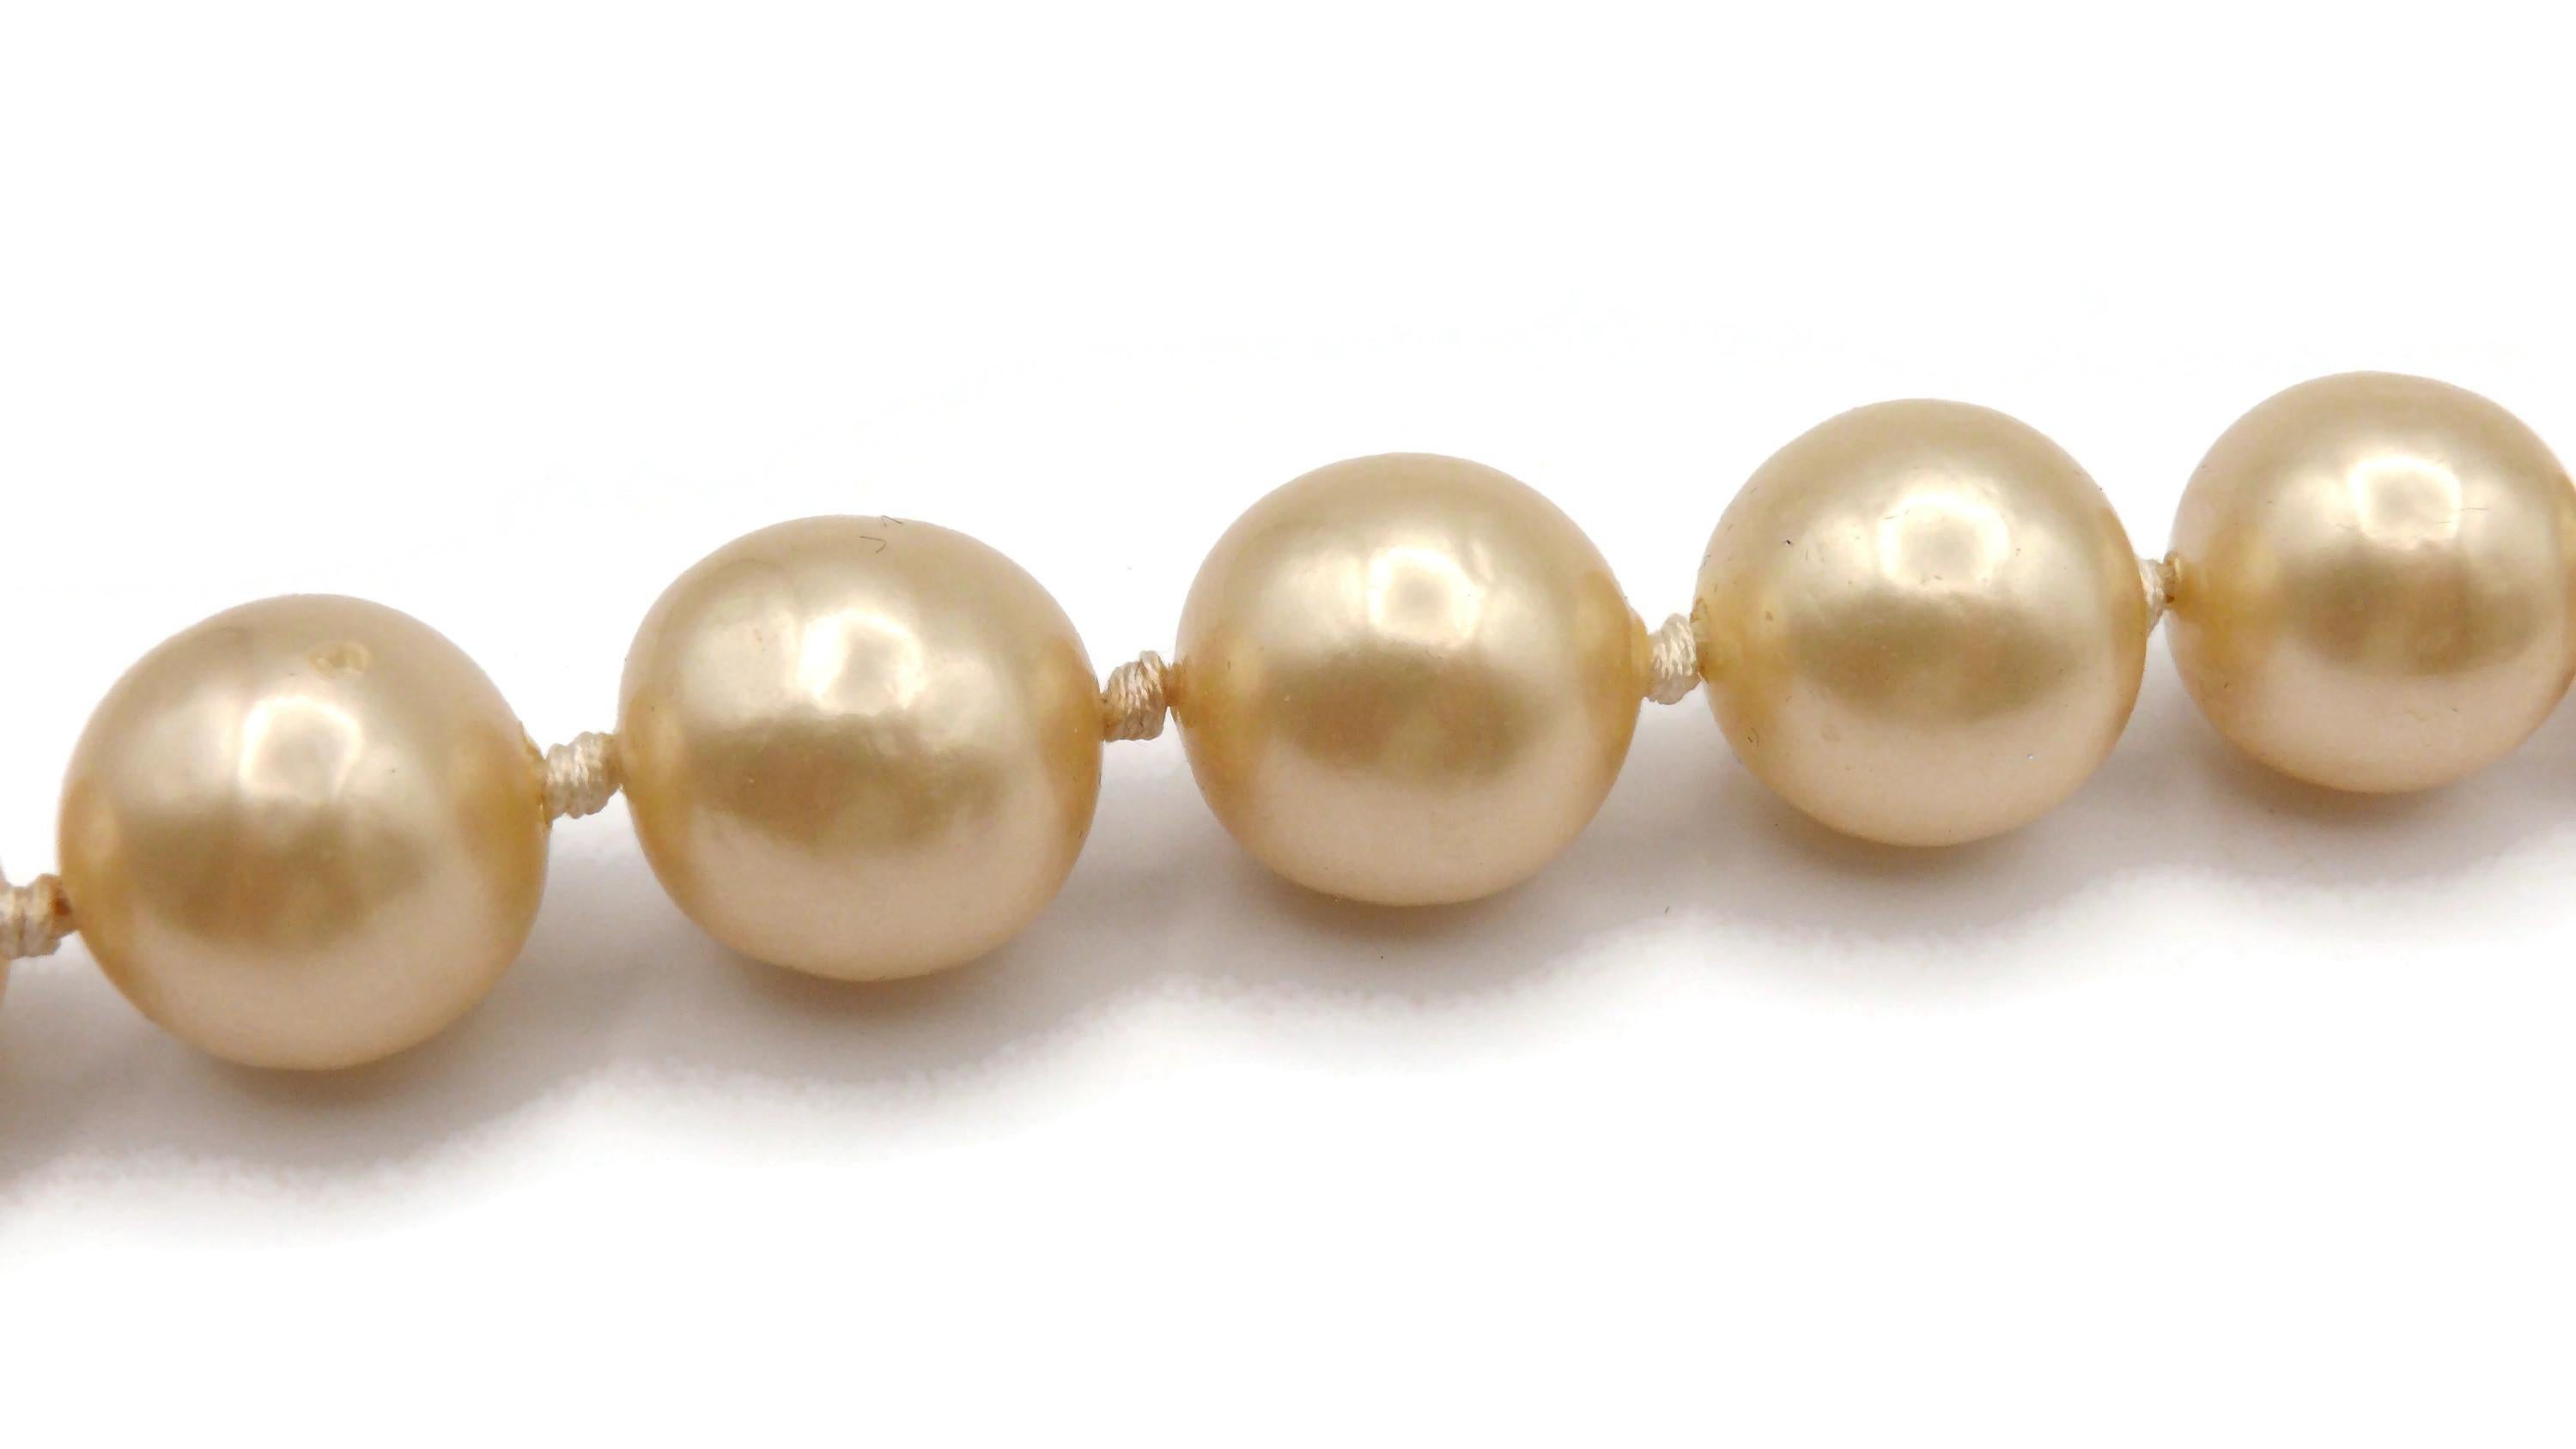 CHANEL by KARL LAGERFELD Vintage Large Faux Pearl Necklace, 1993 For Sale 1